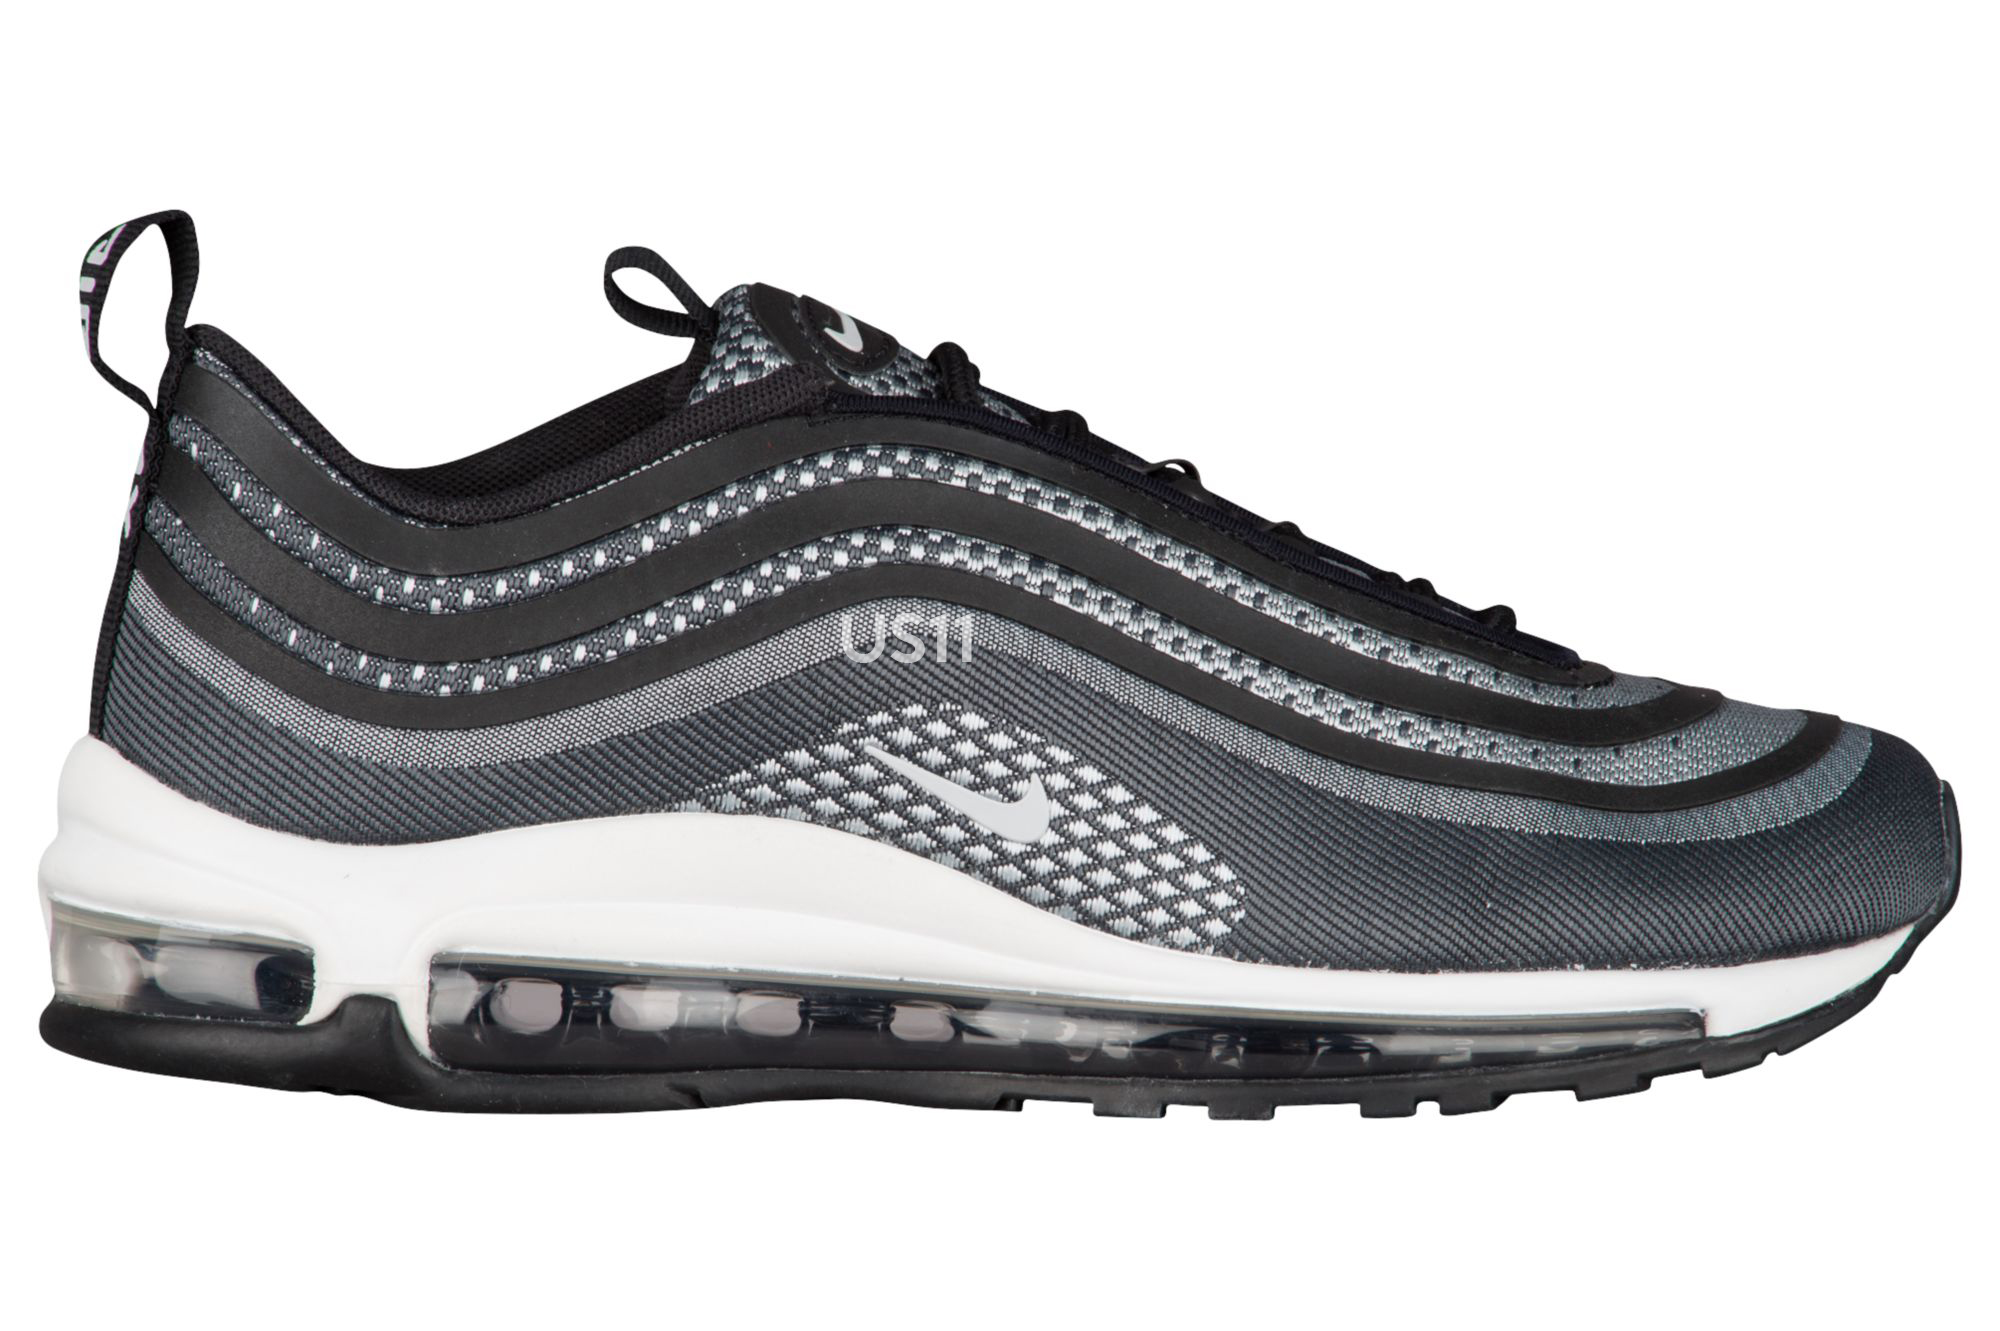 The Nike Air Max 97 Gets the Ultra Treatment - WearTesters